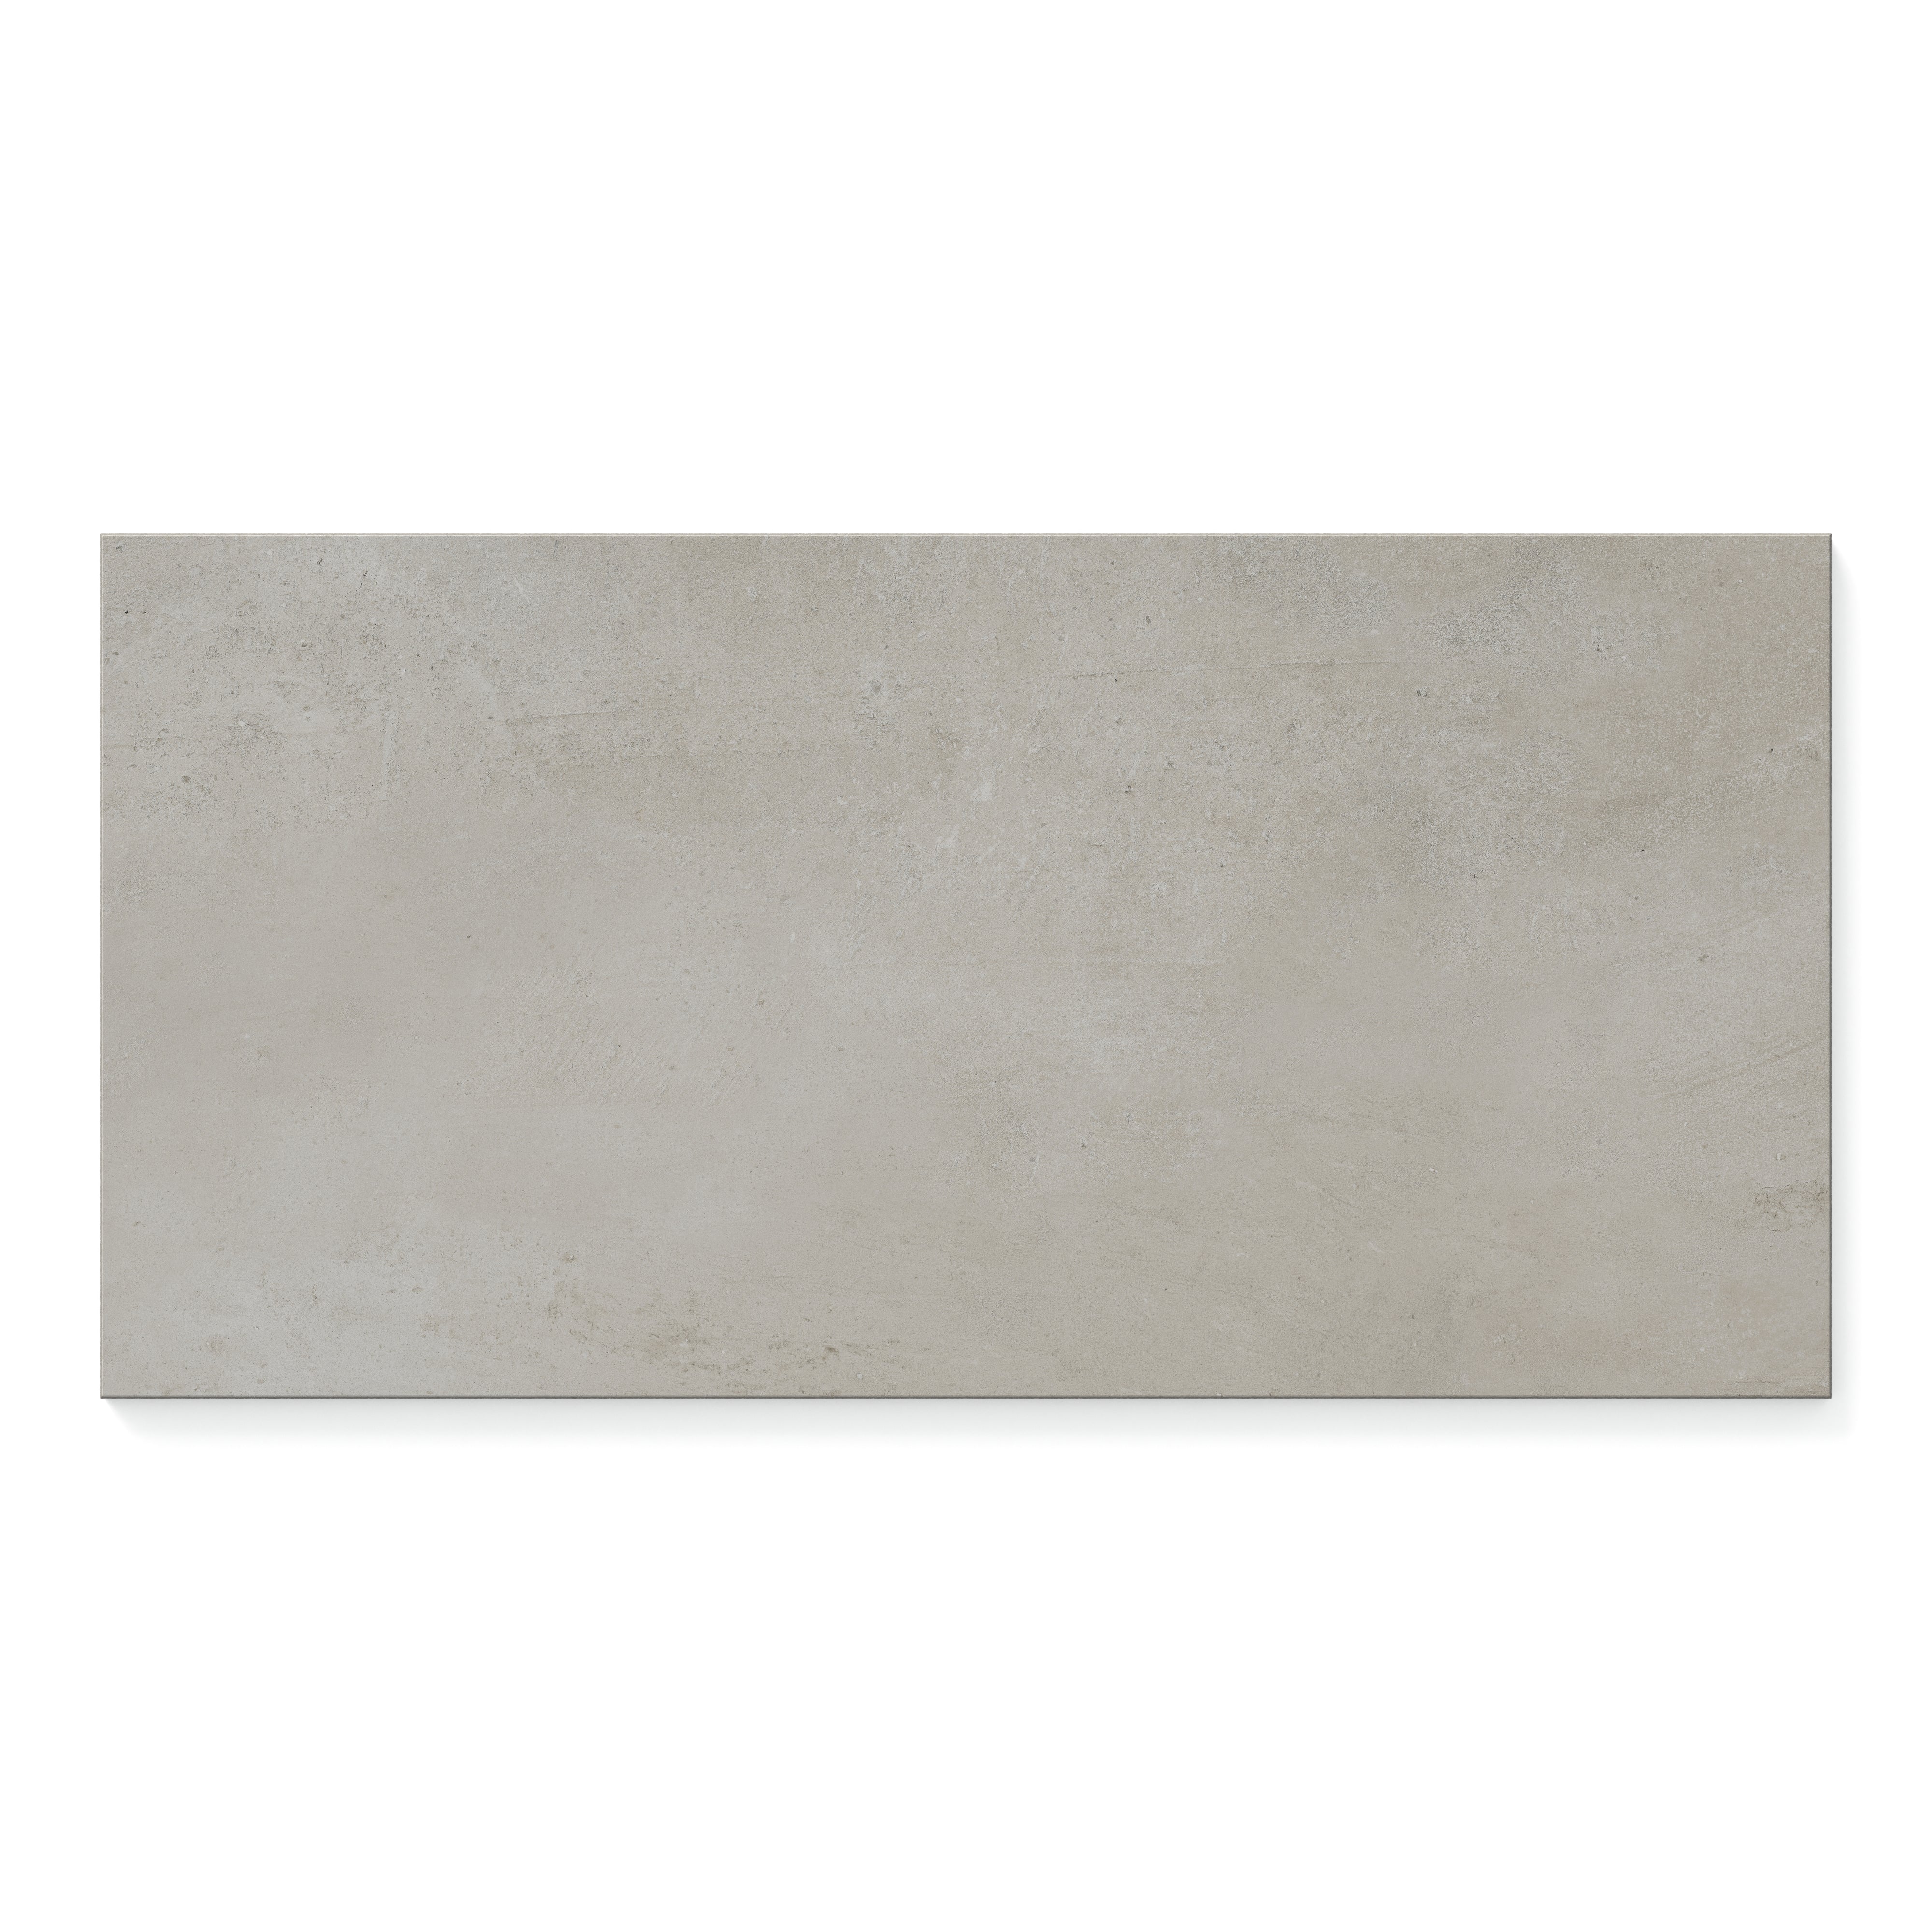 Ramsey 12x24 Polished Porcelain Tile in Putty